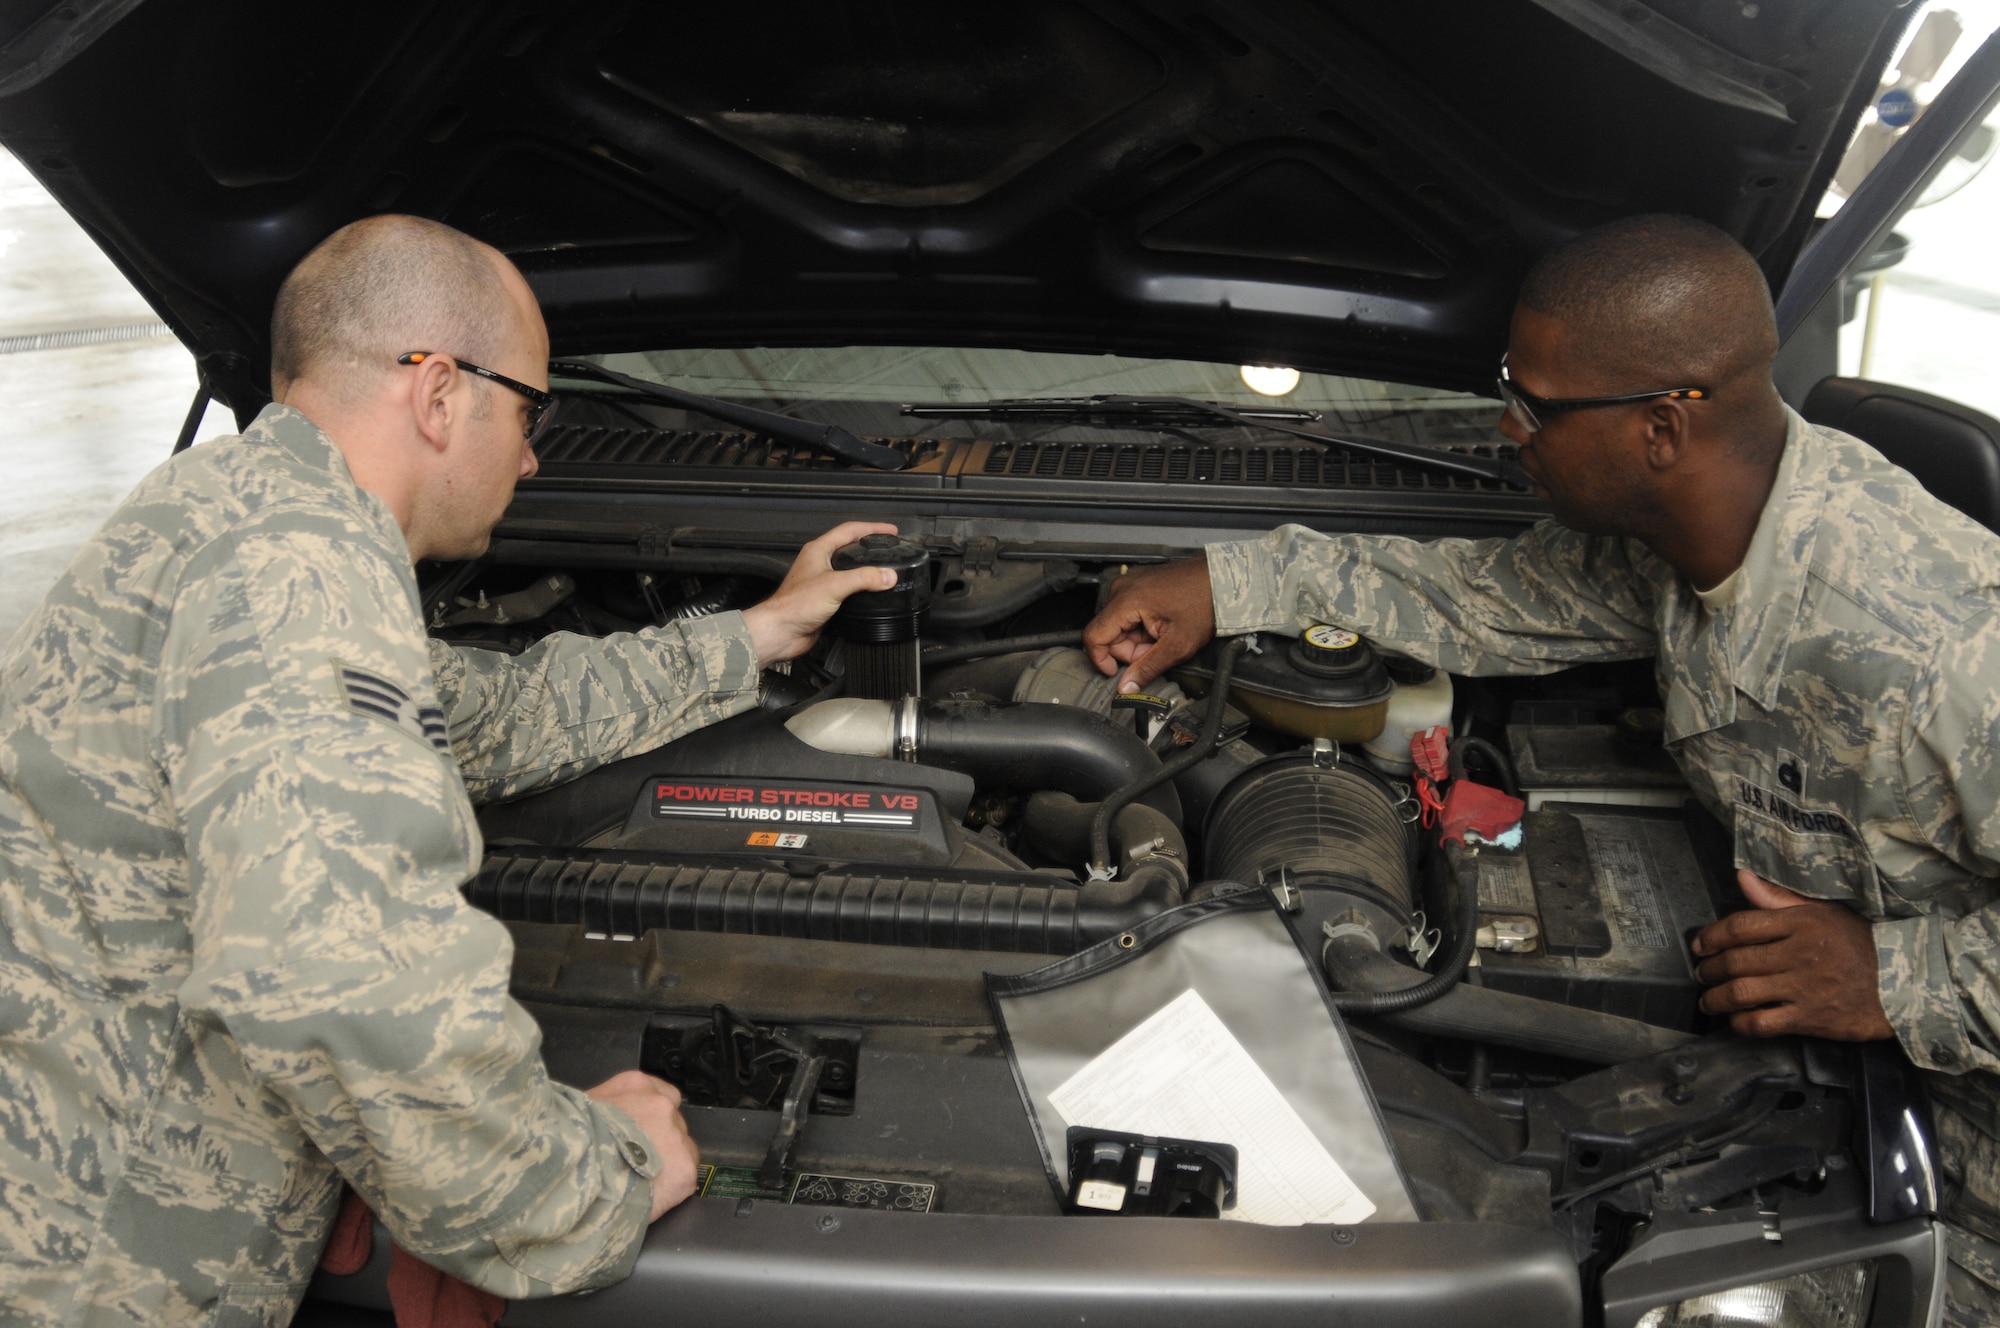 Senior Airman Kristian Magro and Technical Sgt. Jerry Byrdo inspect the engine on a pick-up truck that was operated utilizing a blend of synthetic fuel as part of an alternative fuels test at Selfridge Air National Guard Base, Aug. 10, 2010. The test on the Fischer-Tropsch blend of fuel concluded in July. Selfridge has been the site of a number of test projects of alternative fuels for vehicles and other ground equipment over the last several years. (U.S. Air Force photo by TSgt. David Kujawa) (RELEASED)